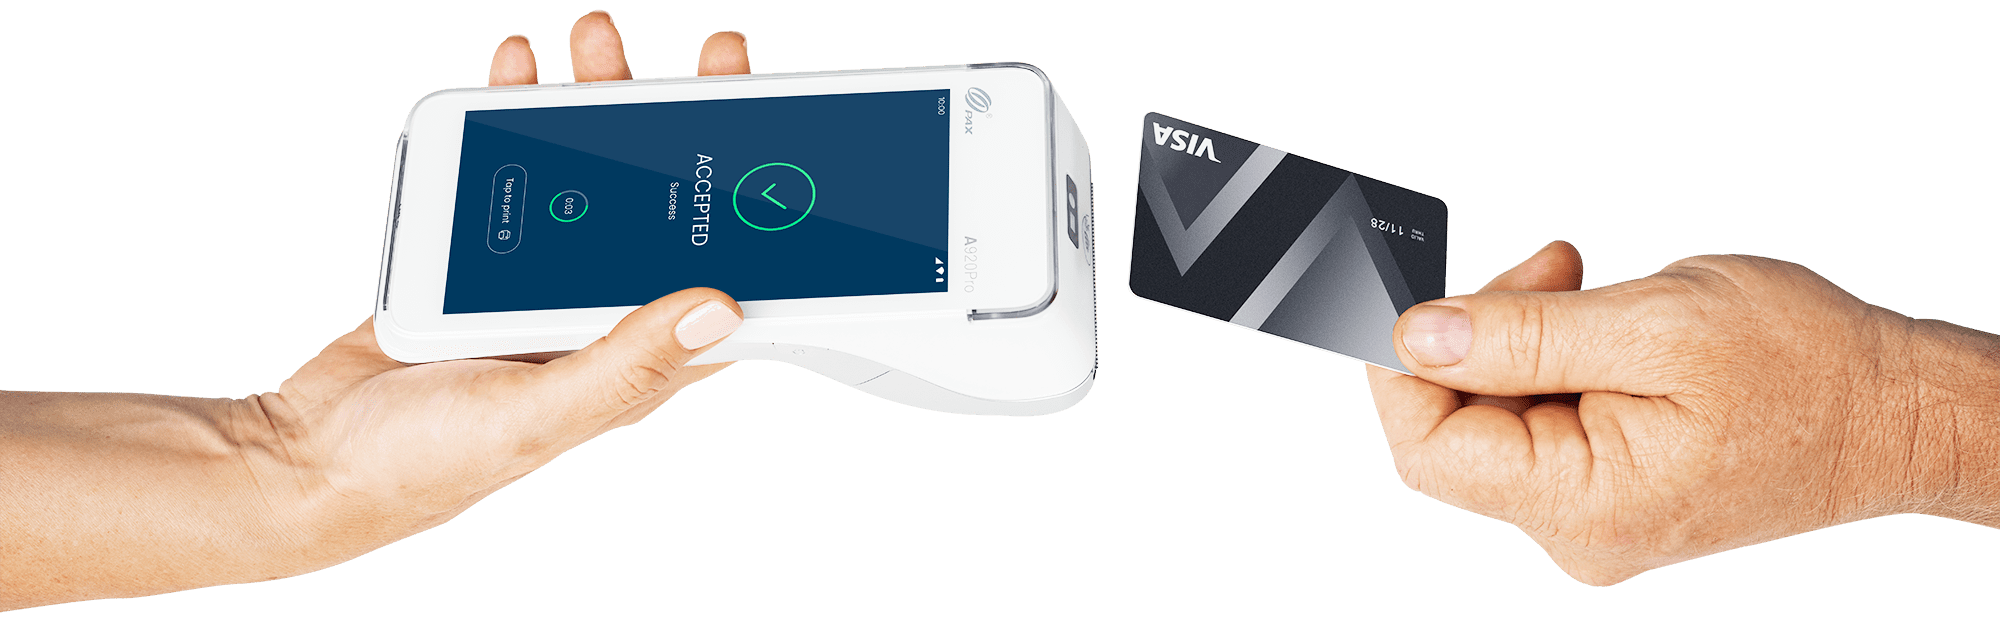 Hand holding Visa card tapping Android Terminal making successful payment